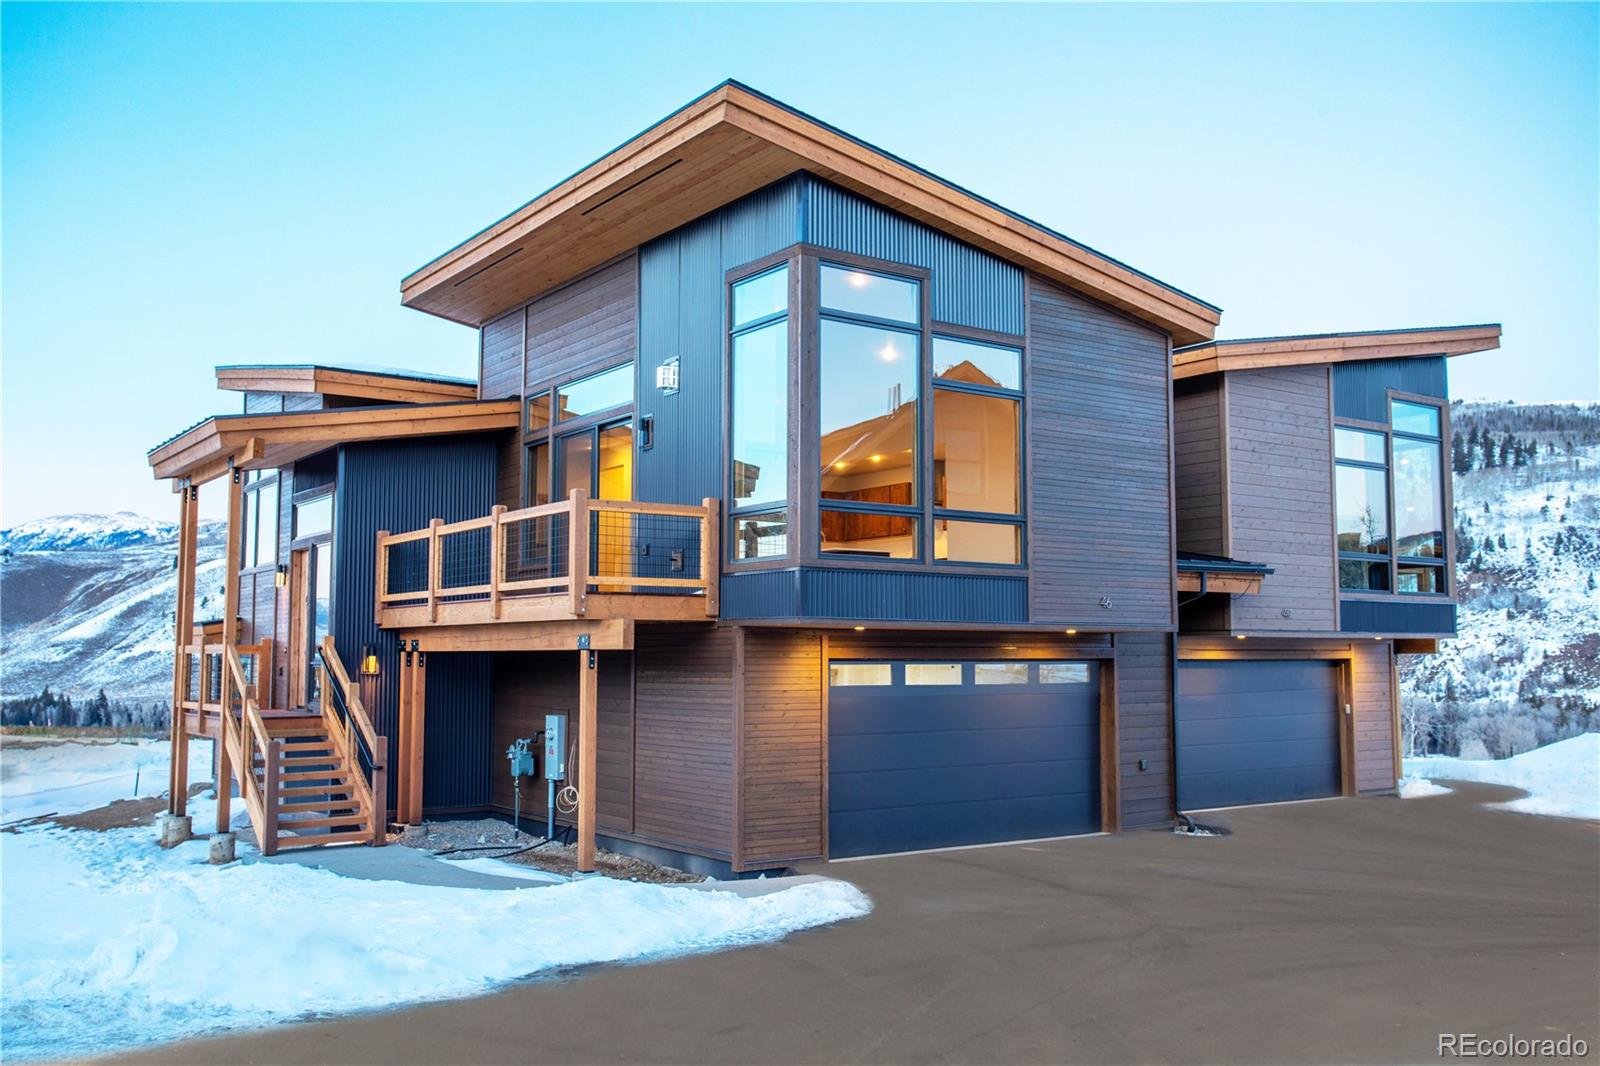 This unique modern look is unique to the Basin Twin Cabin. You will not find this look anywhere else in Summit County.